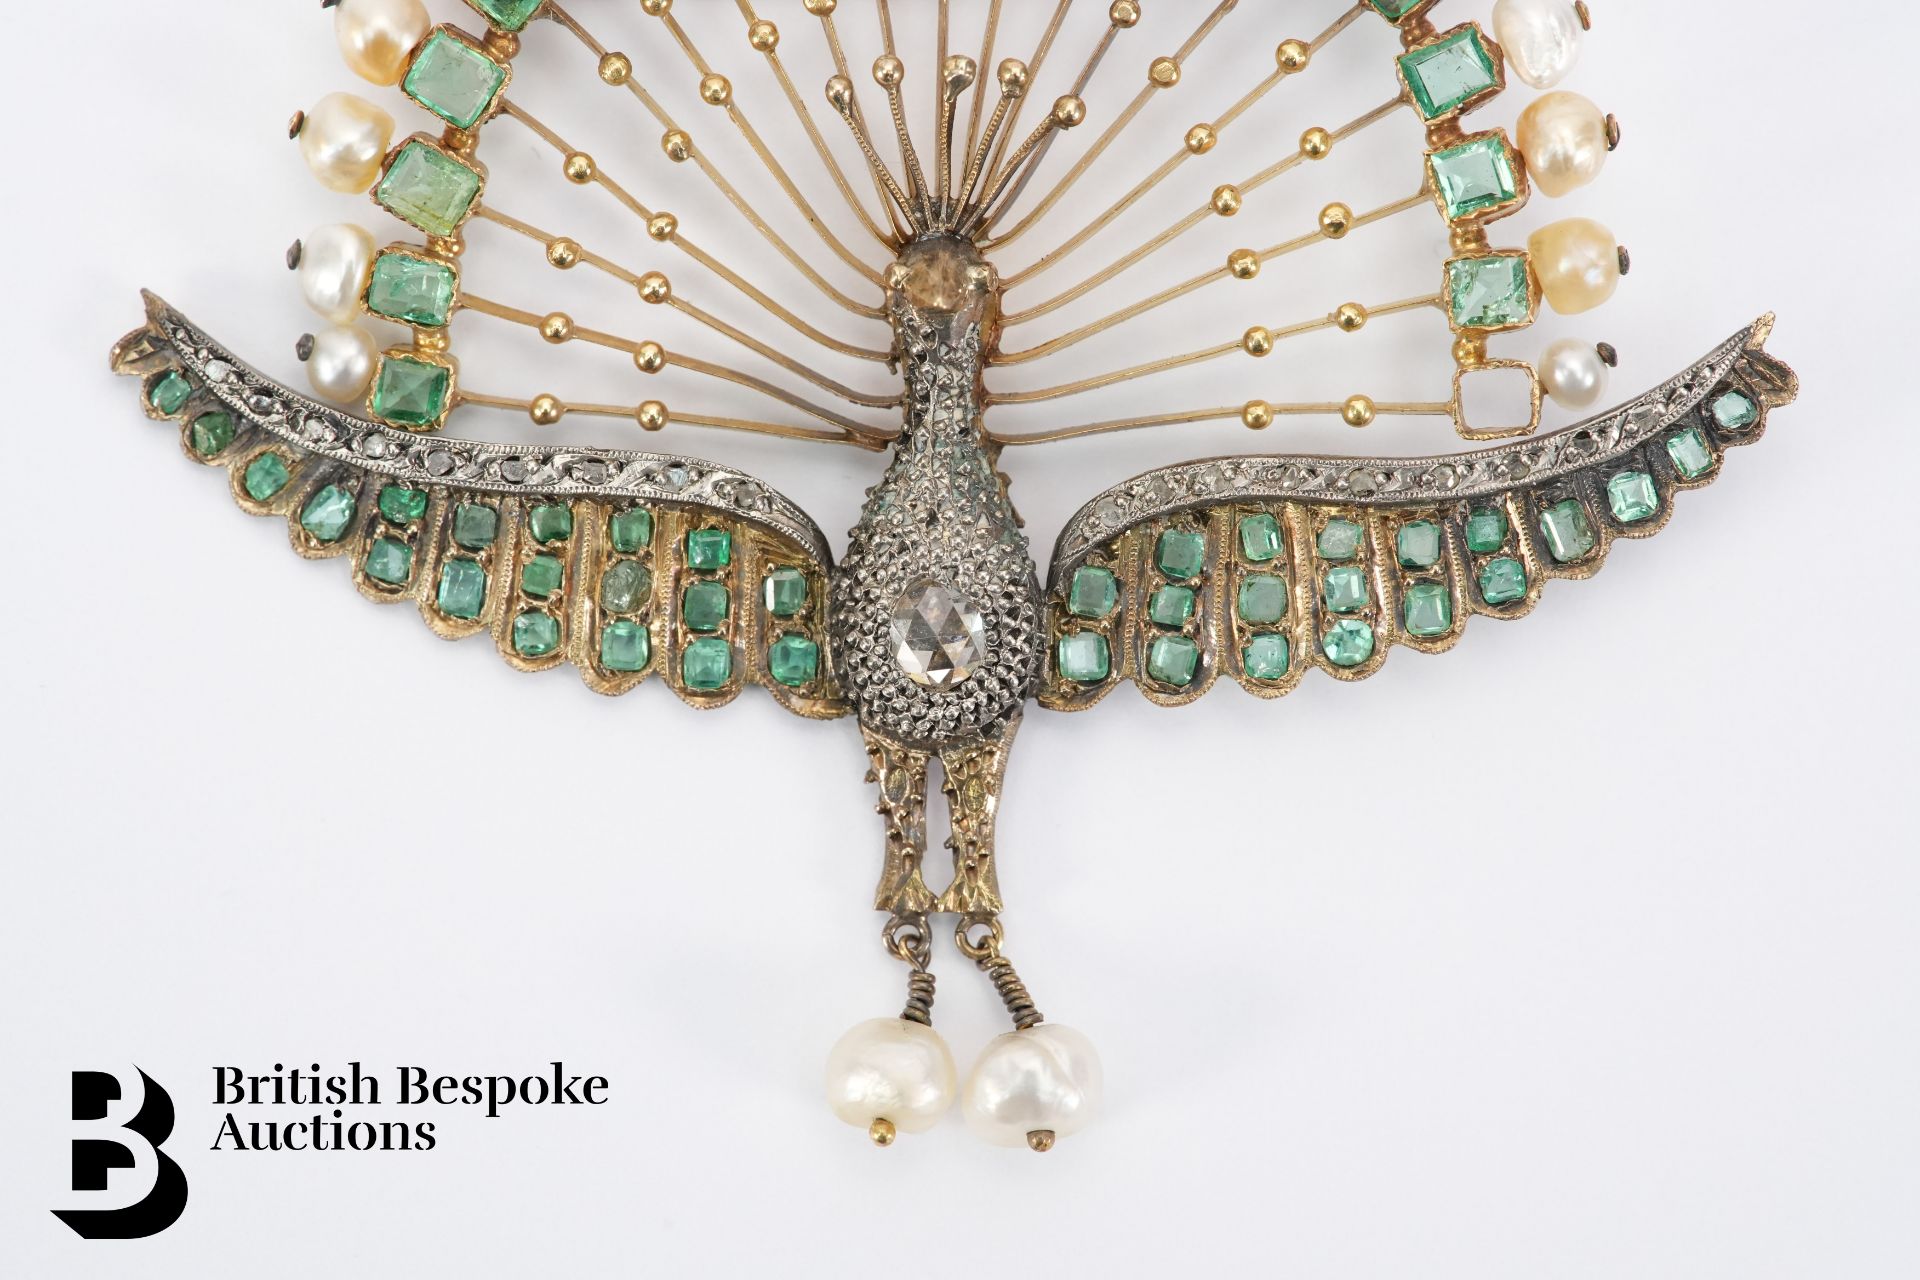 Victorian 18ct Gold Egyptian Revival Emerald, Diamond and Pearl Peacock Brooch - Image 2 of 7